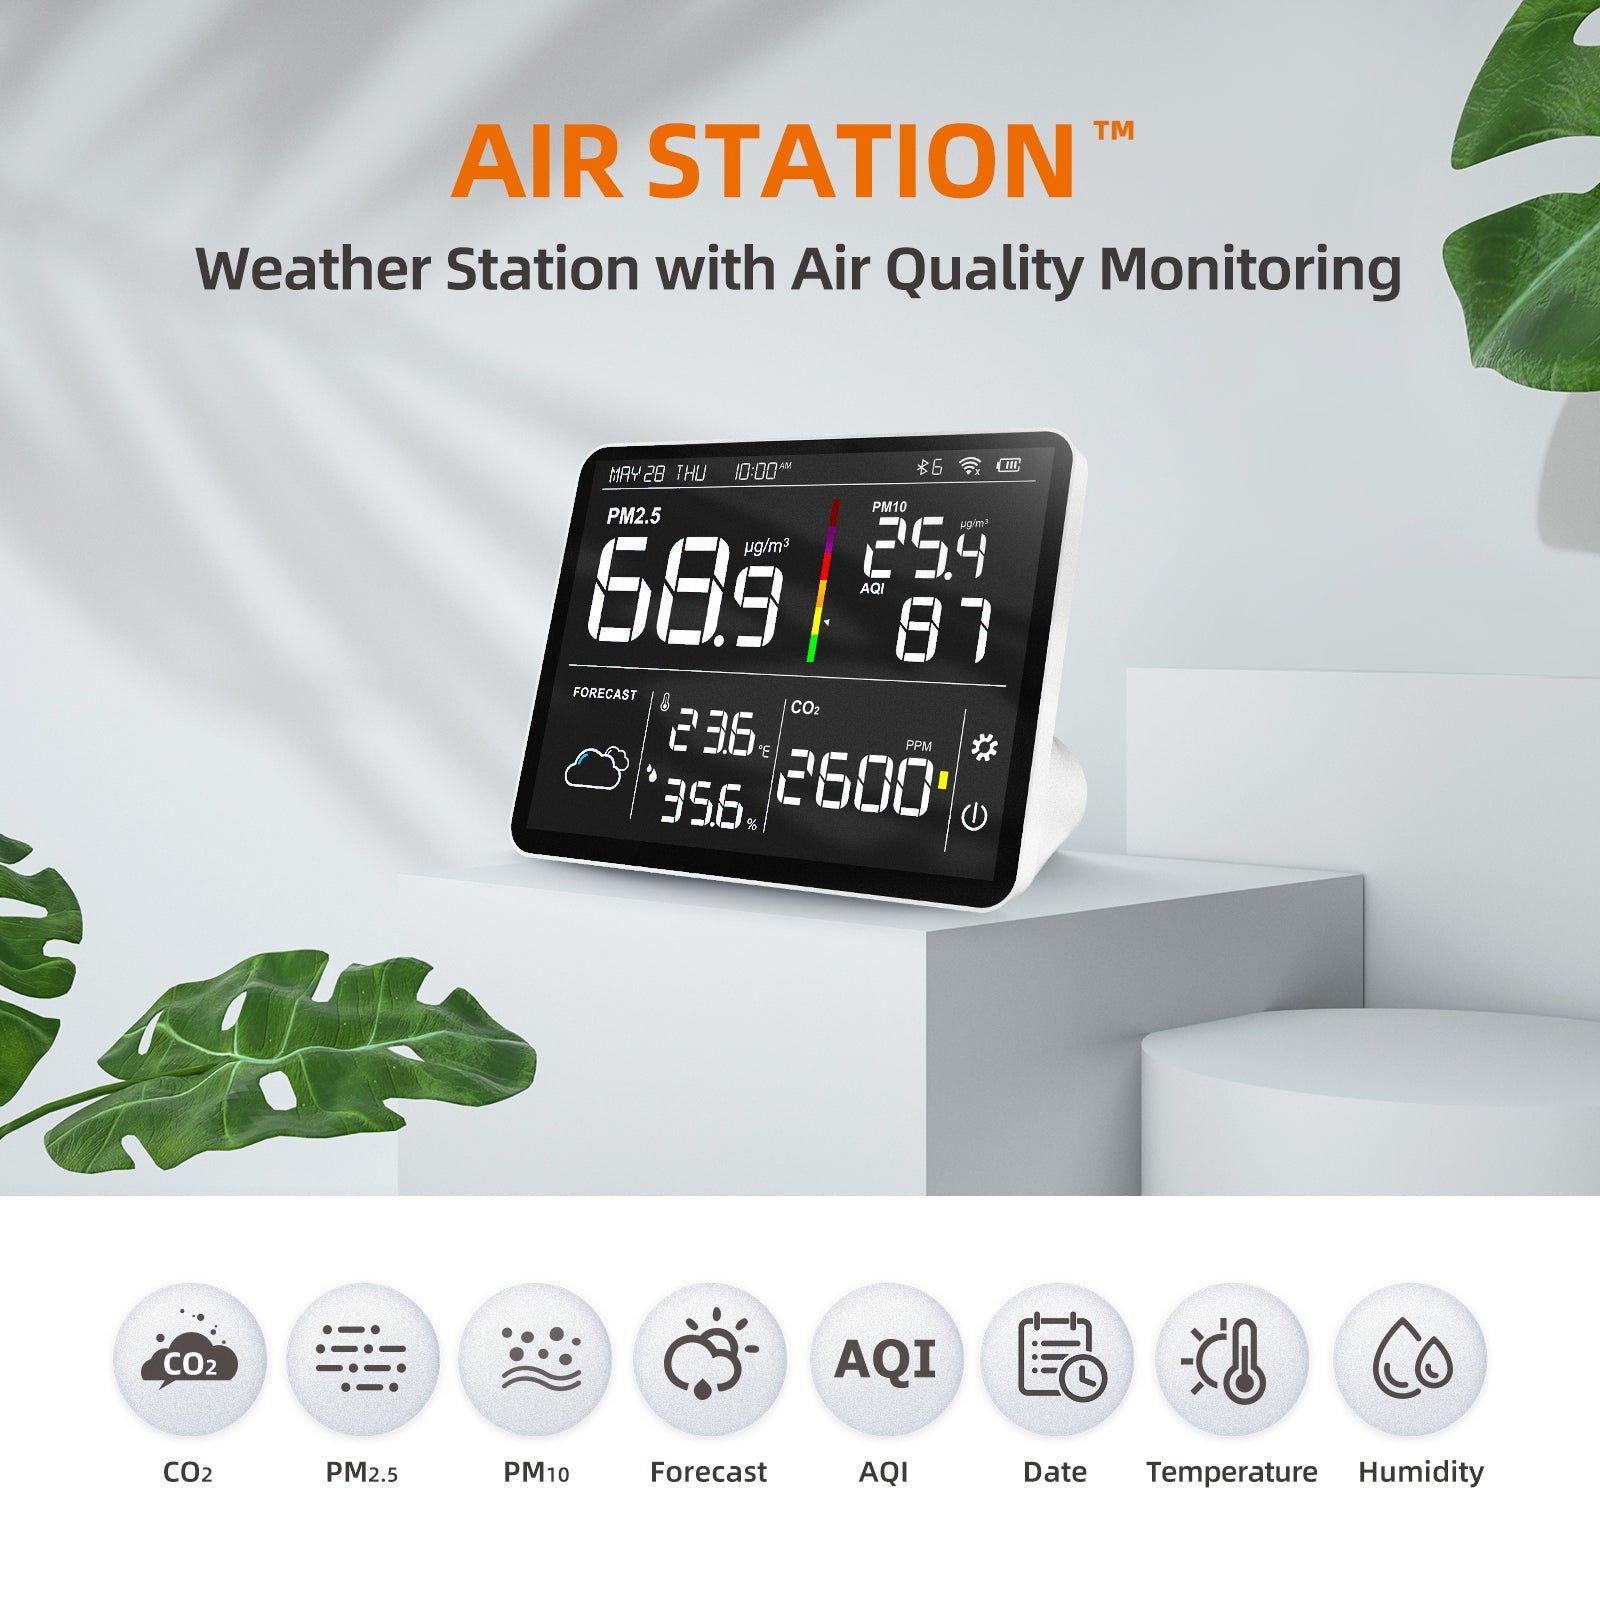 Temtop M100 8 in 1 Air Quality Monitor Detecting CO2 PM2.5 PM10 AQI - Temtop